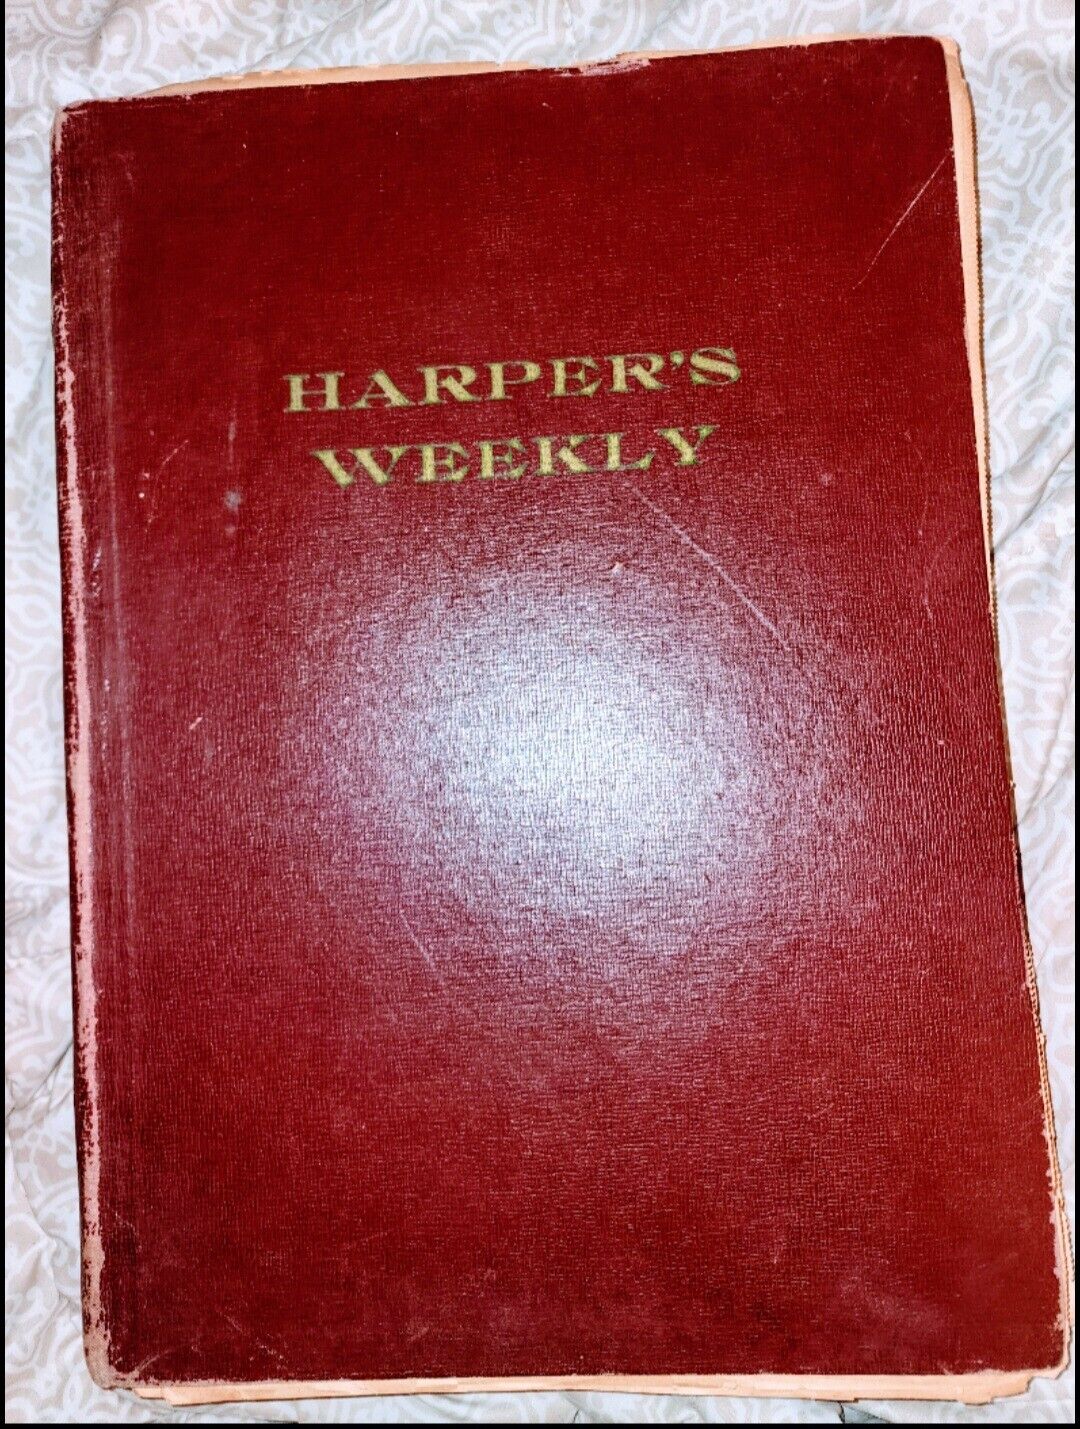 Book of over 50 original Harpers Weekly 1863 articles includes 4th of july 1863